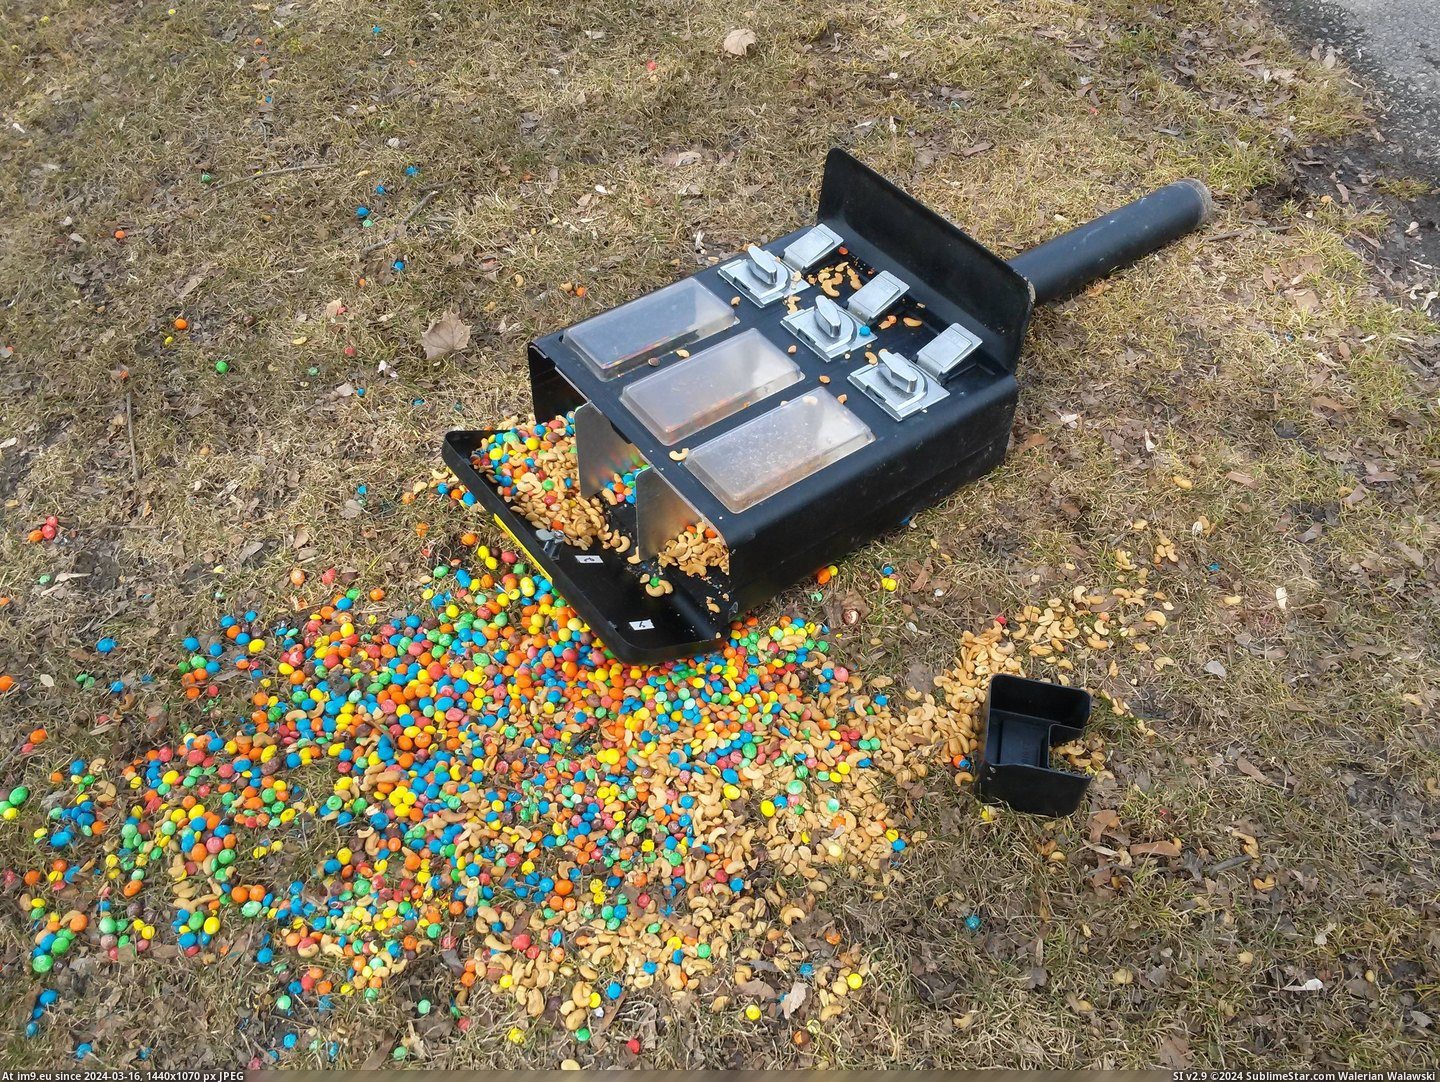 #Funny #Day #Years #Squirrels #Marquette #Park #Machine #Nuts [Funny] Years from now squirrels at Marquette Park will tell their grandchildren of the day the nuts-M&Ms machine collapsed. Pic. (Bild von album My r/FUNNY favs))